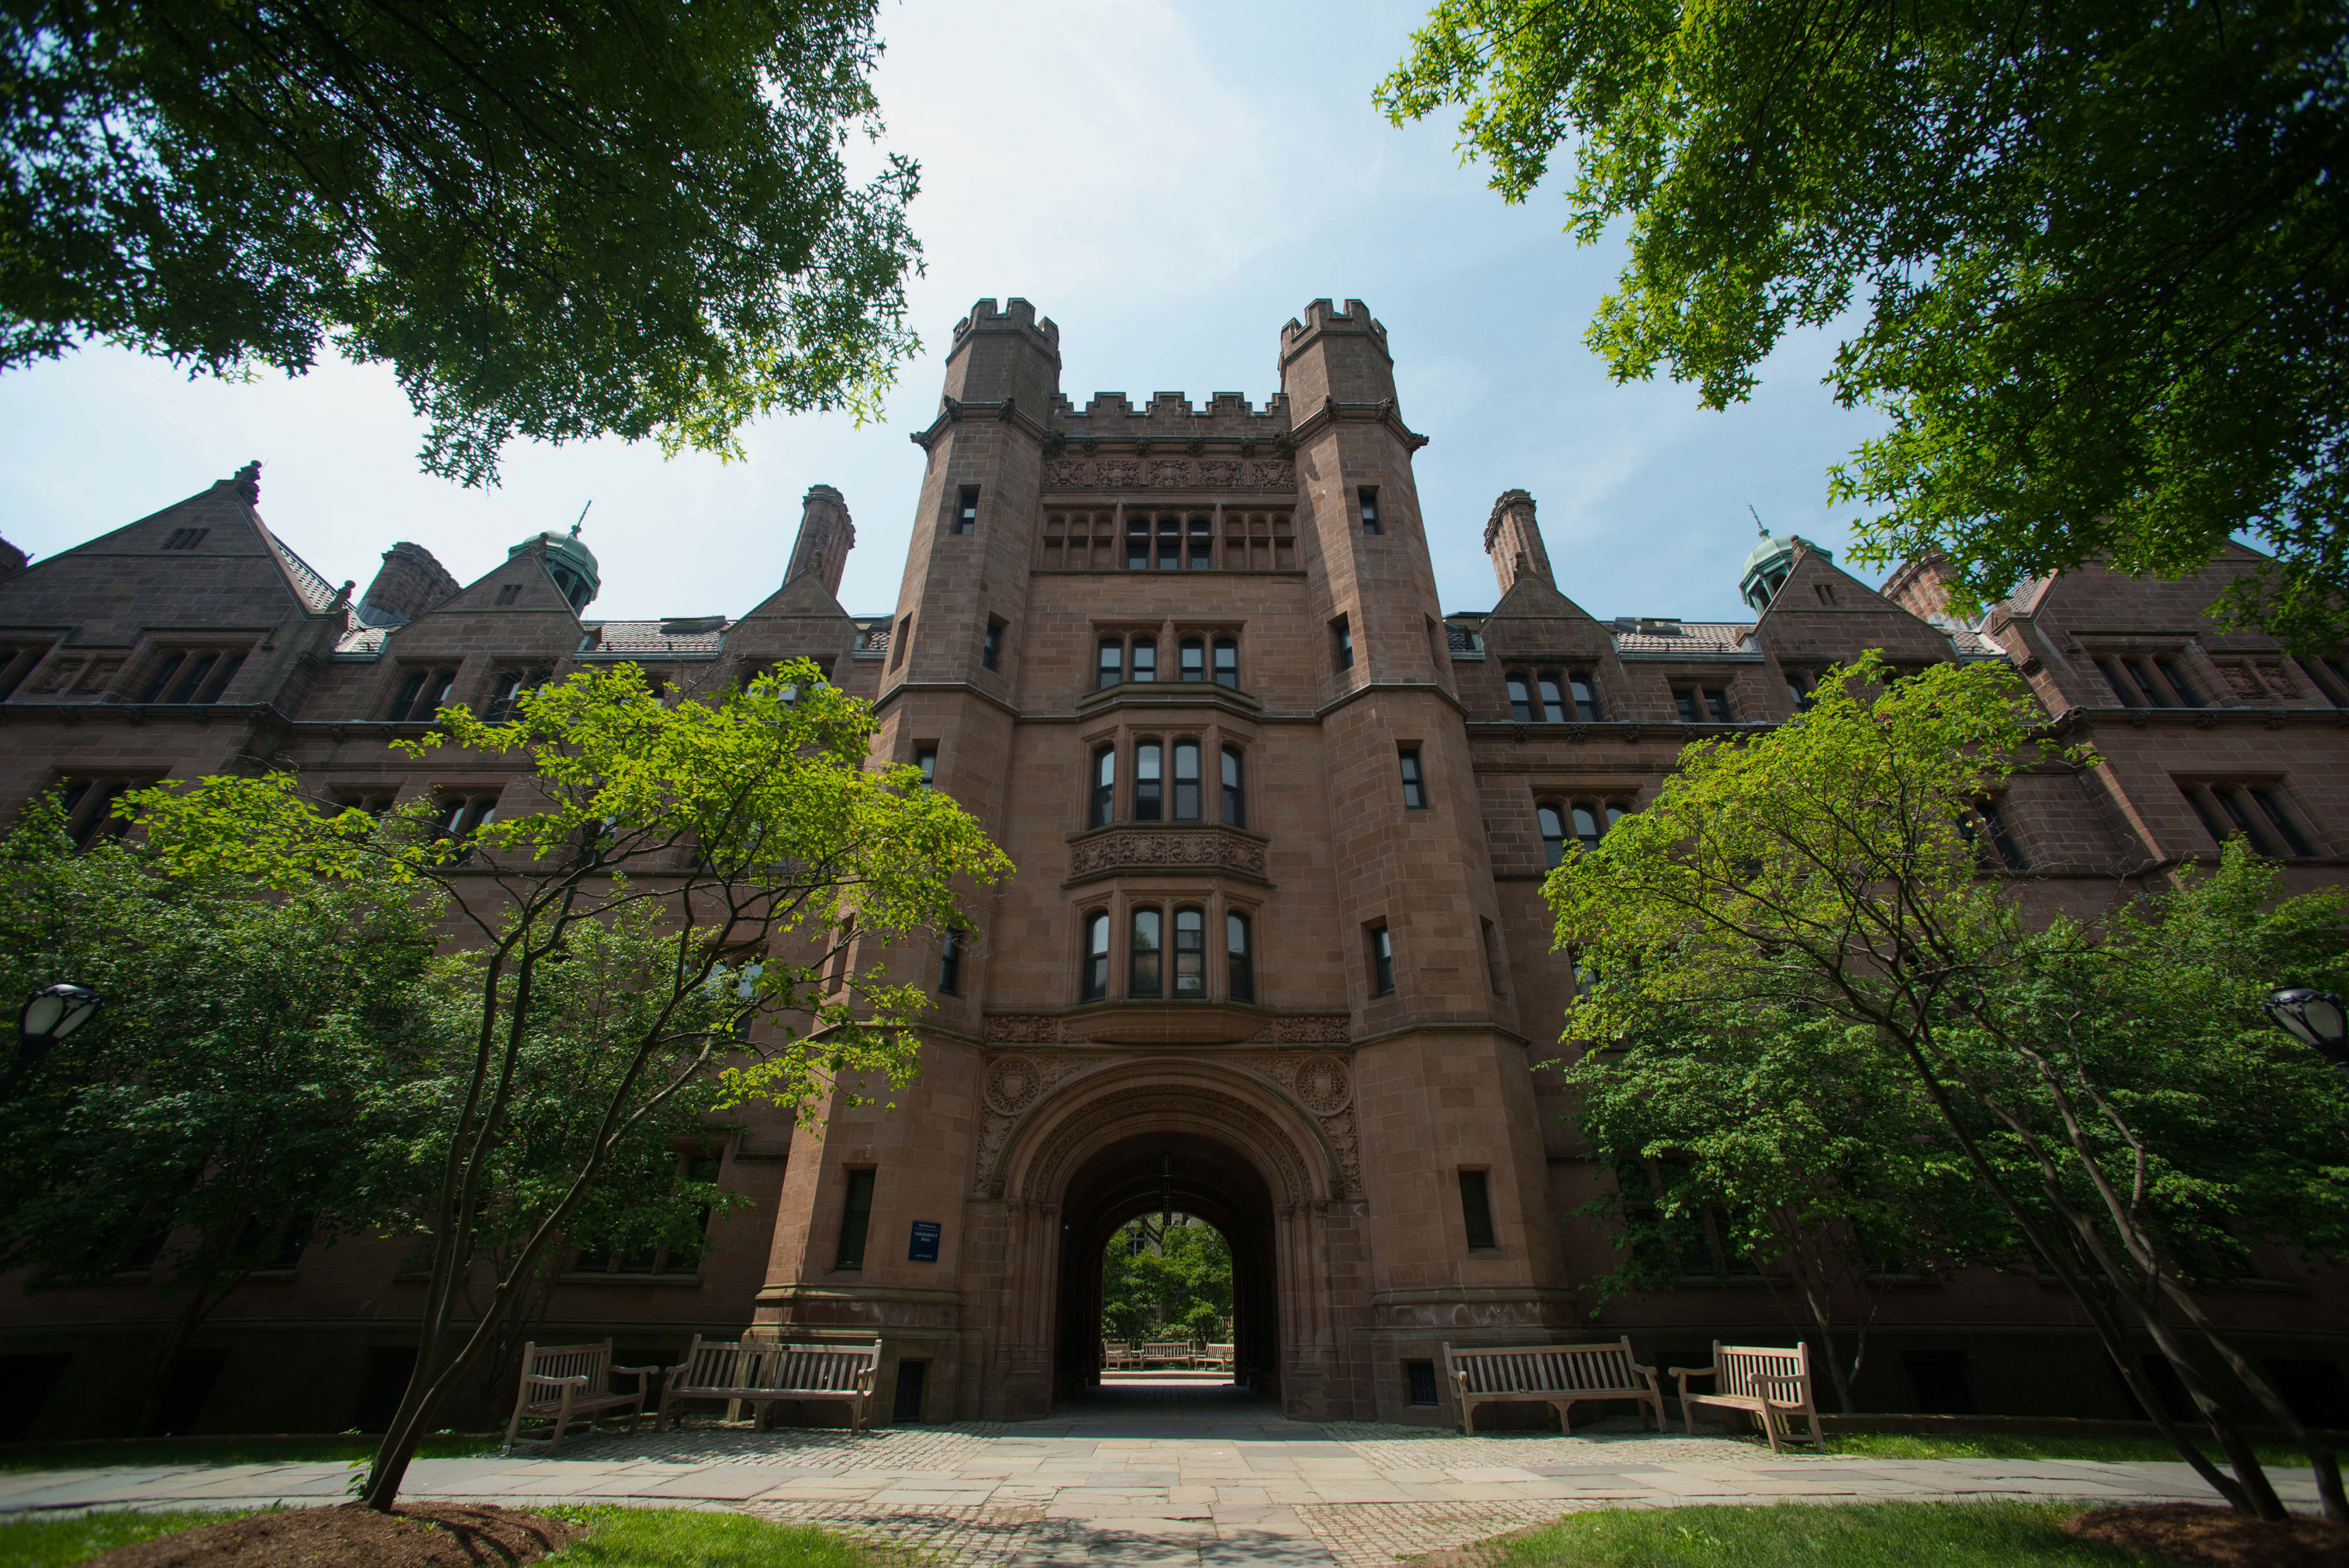 Vanderbilt Hall stands on the Yale University campus in New Haven, Connecticut, on June 12, 2015. (Craig Warga—Bloomberg/Getty Images)